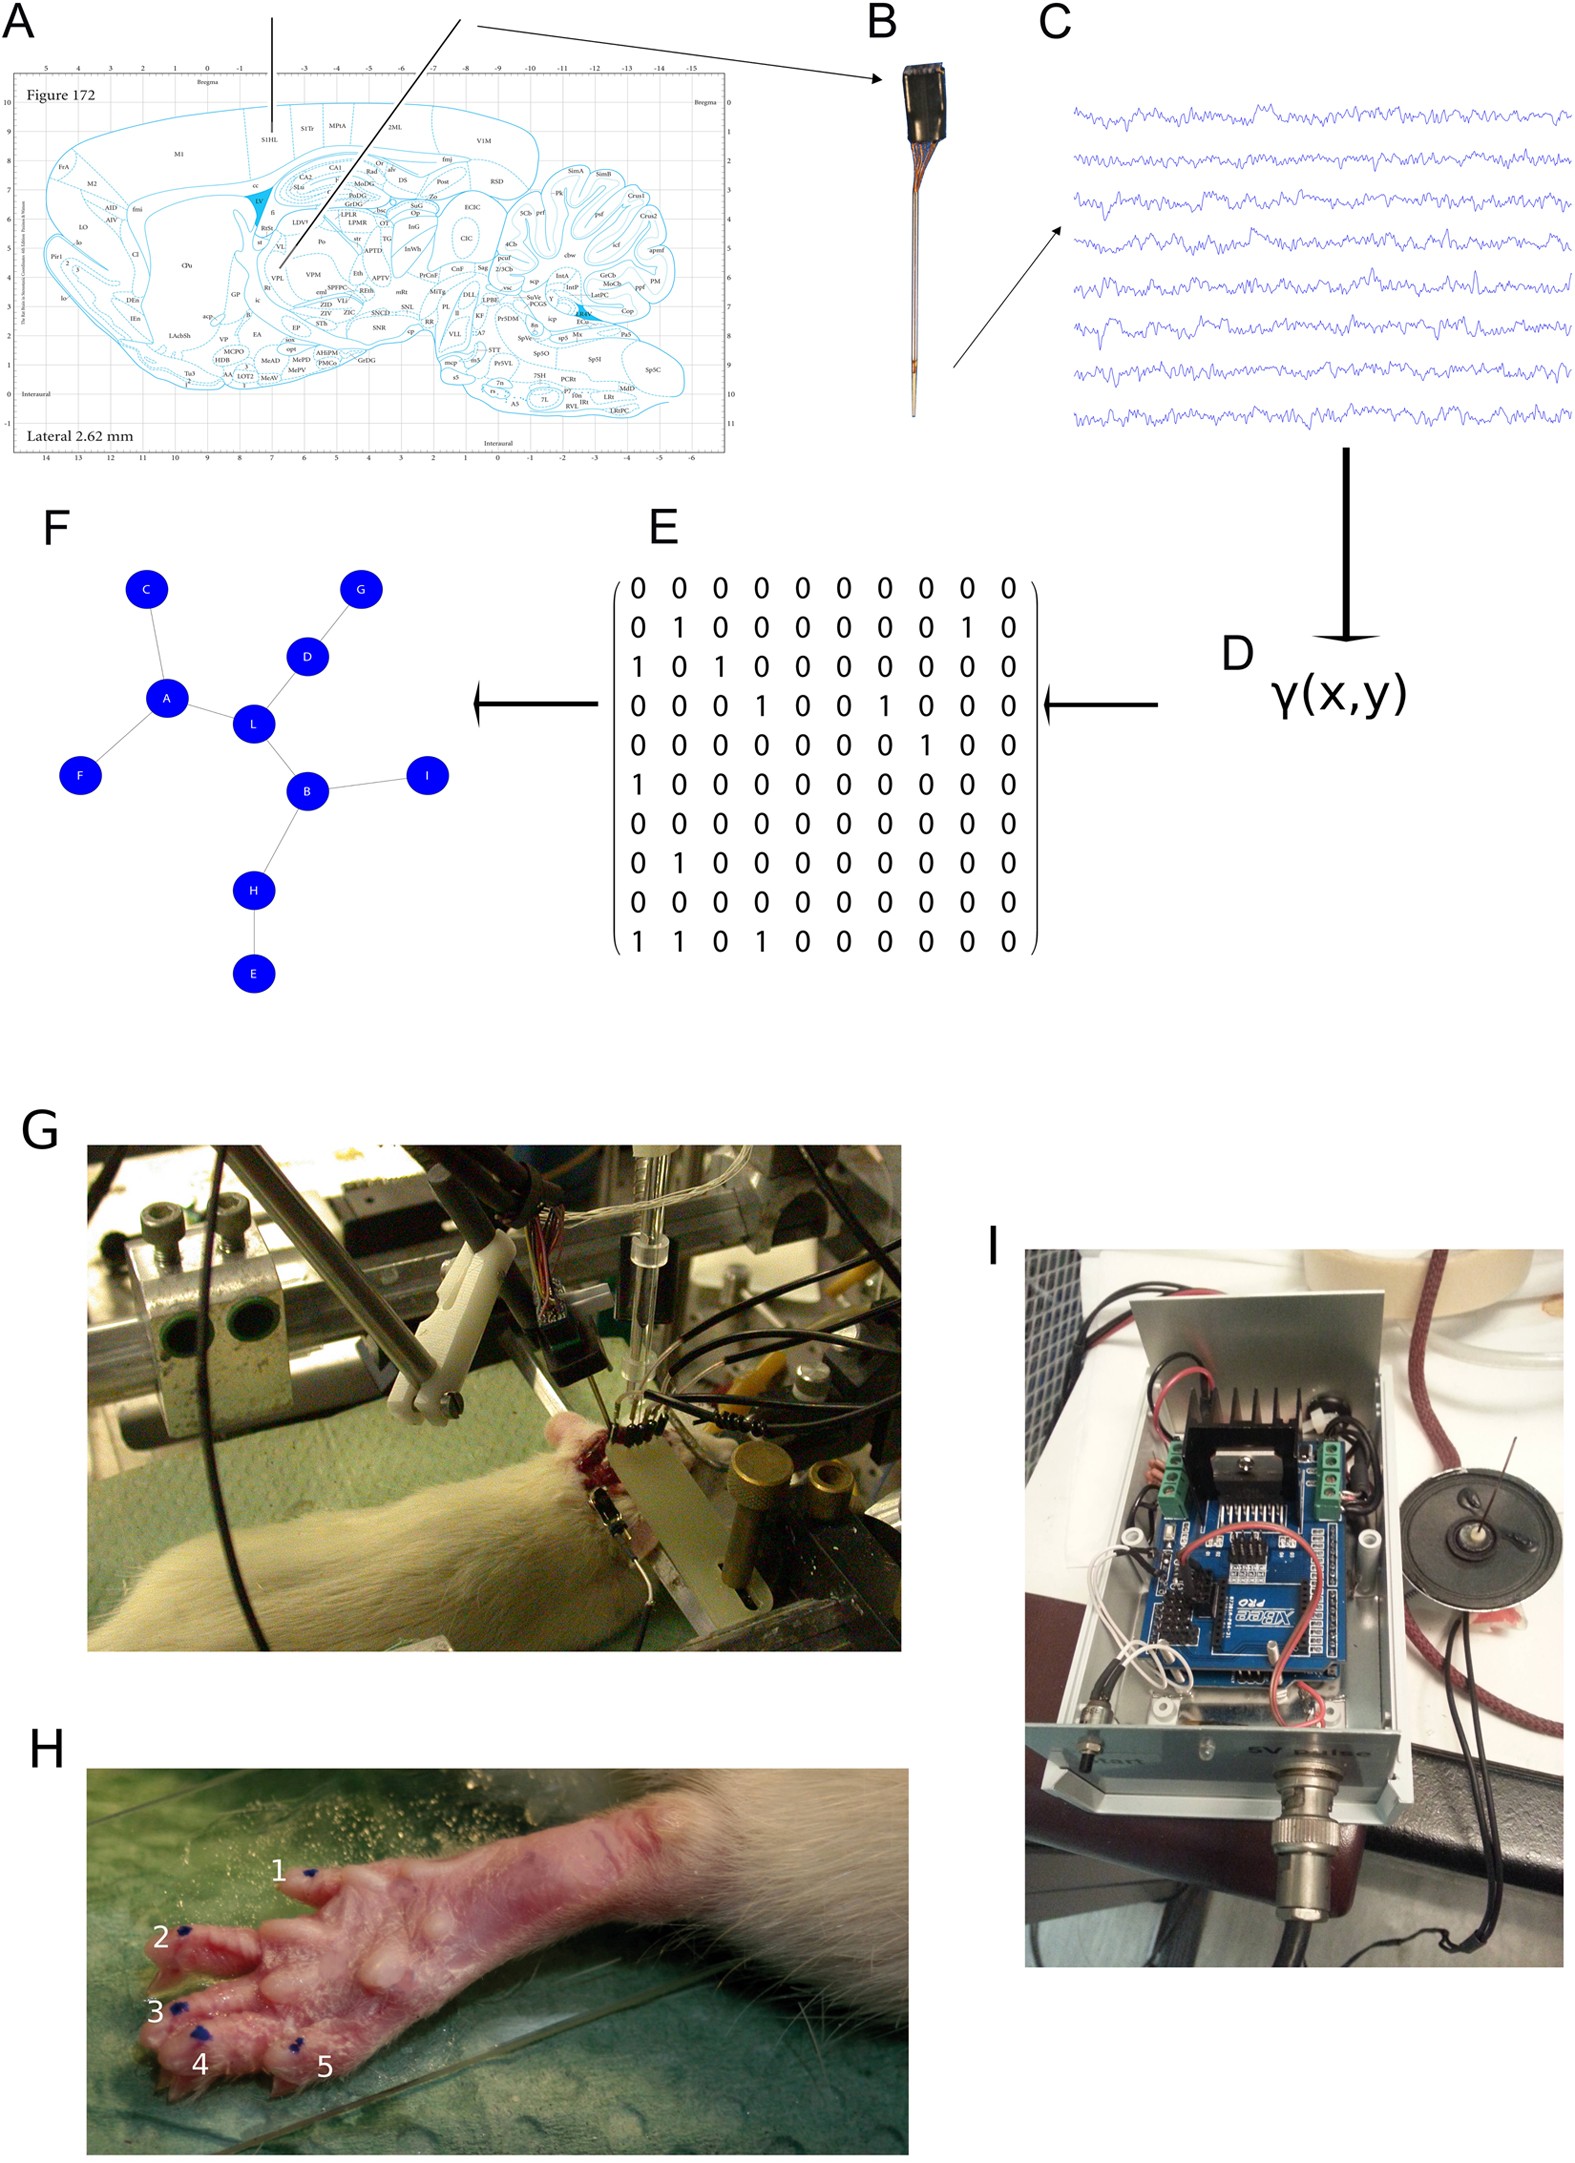 Electrophysiological effects of non-invasive Radio Electric Asymmetric  Conveyor (REAC) on thalamocortical neural activities and perturbed  experimental conditions